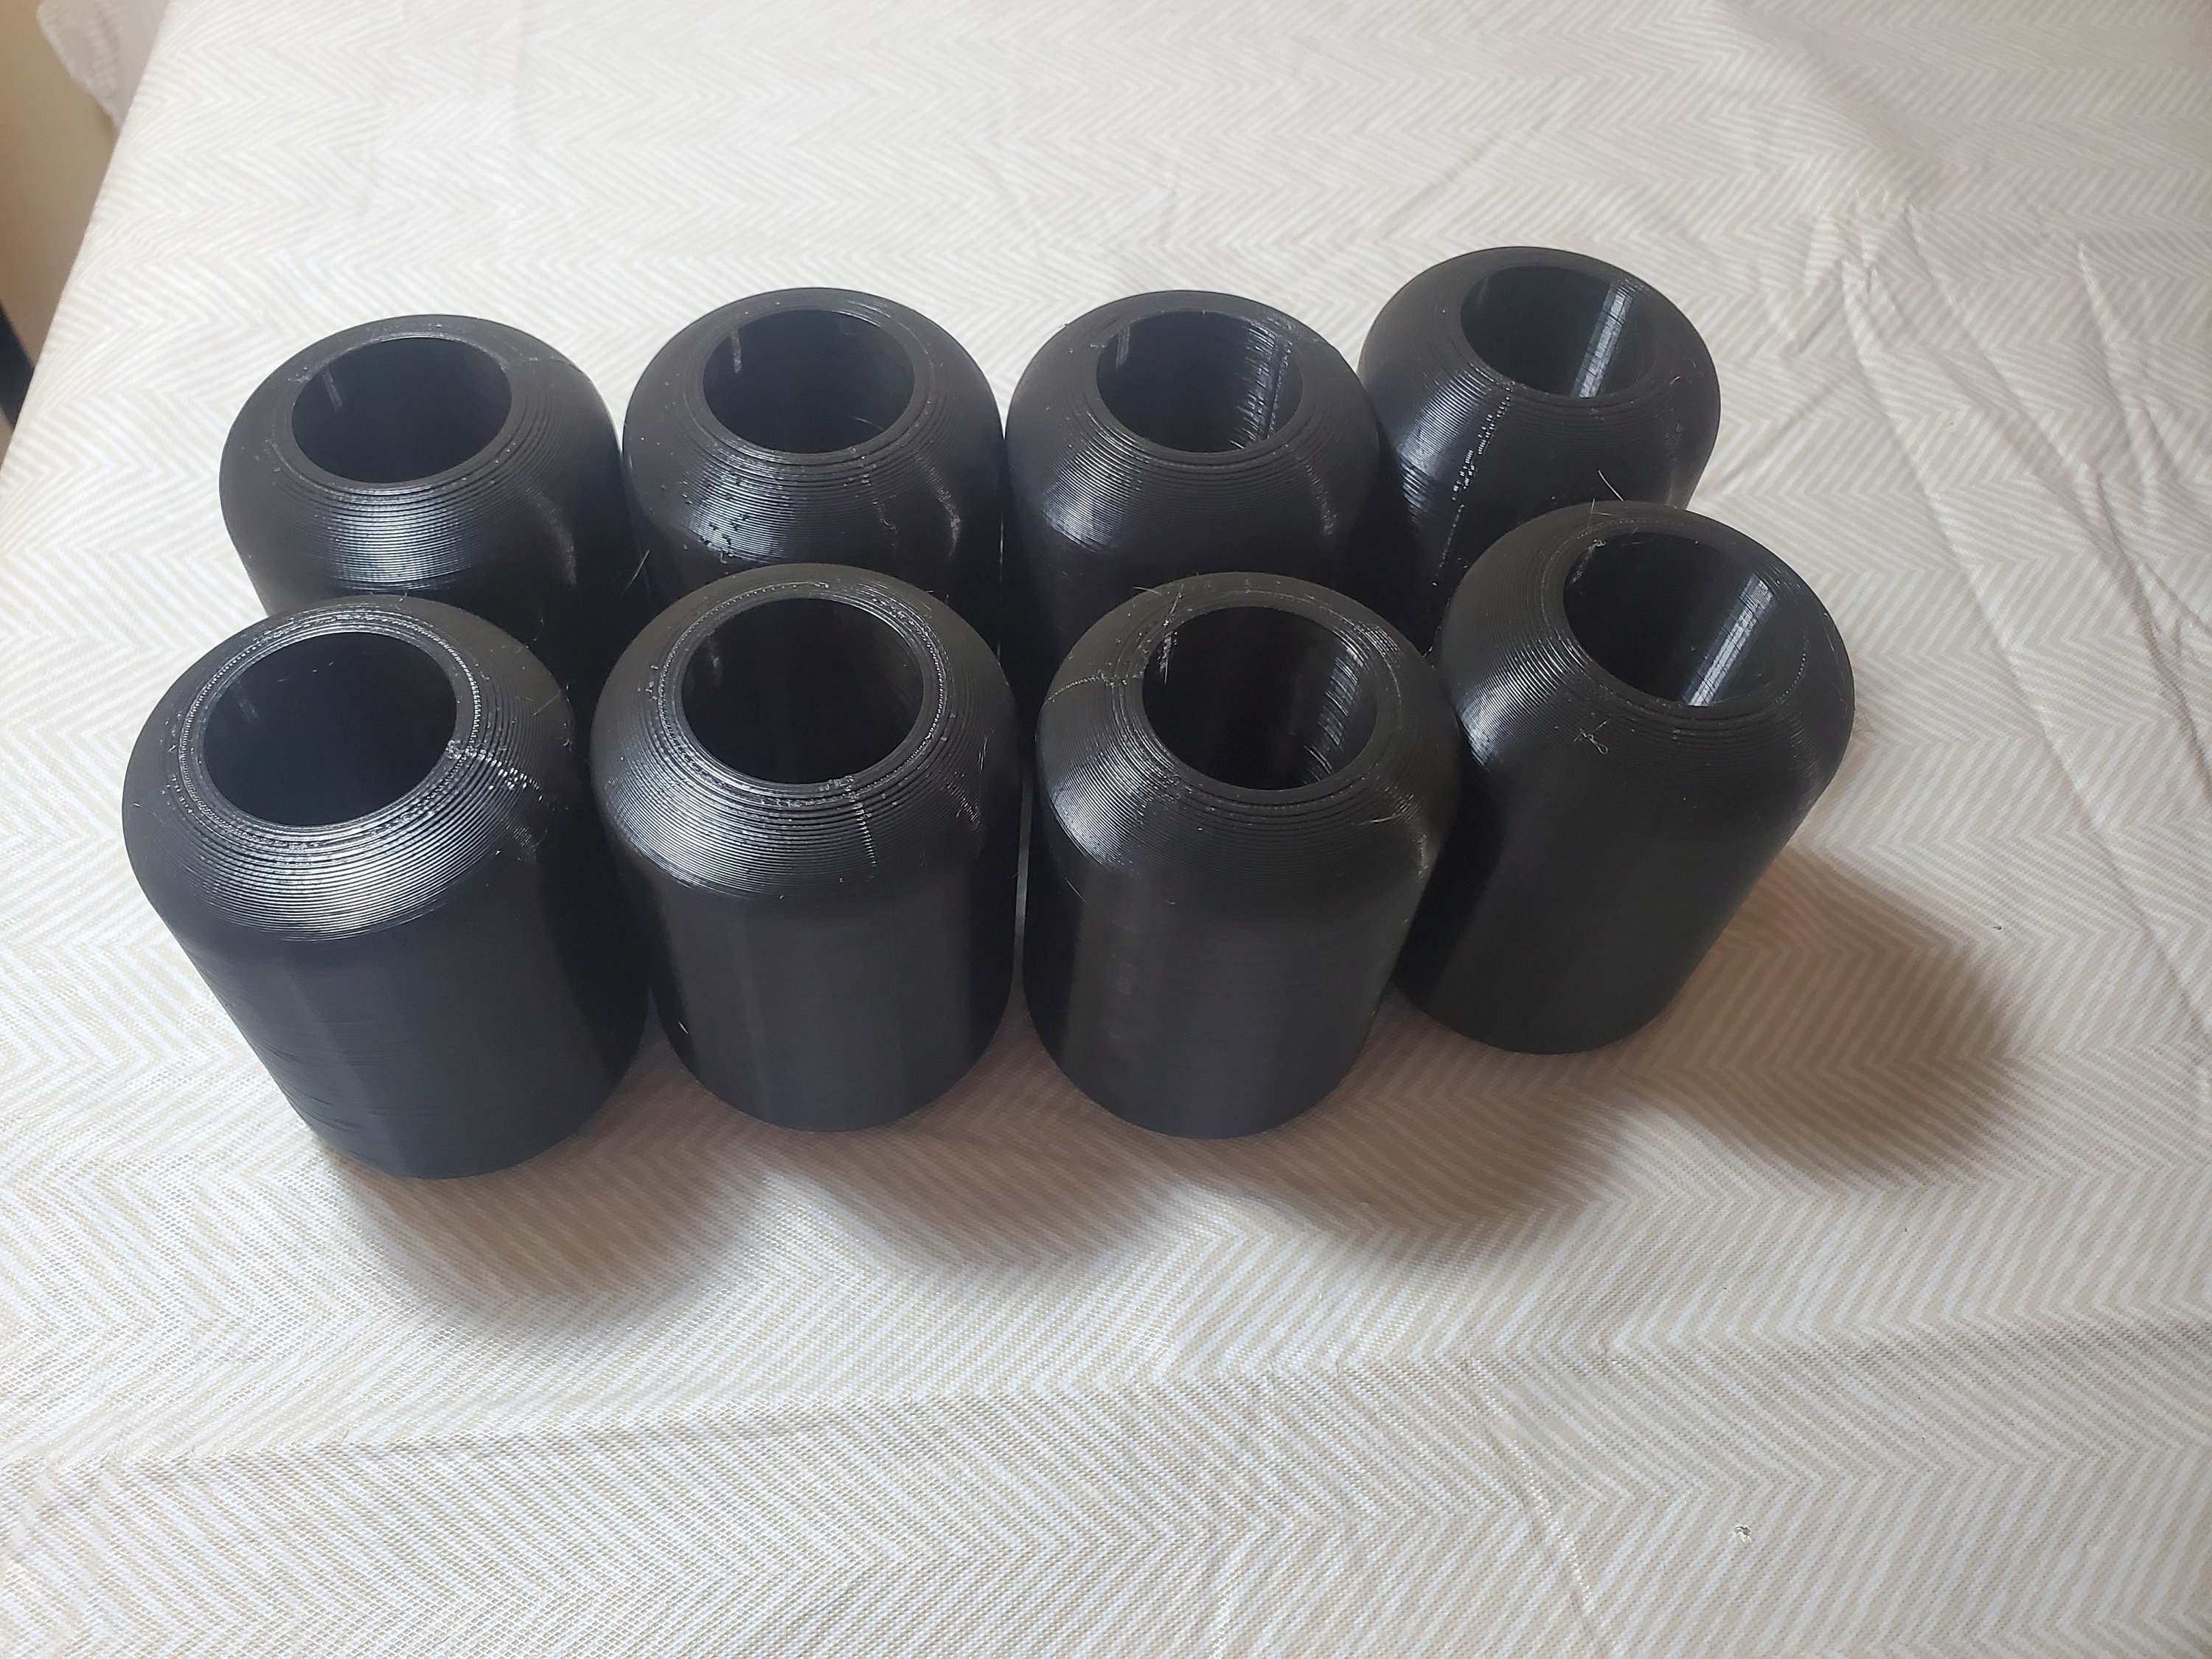 Black Curtain Spacer 3.6in Long for Large Diameter Rod, 8 Pieces 